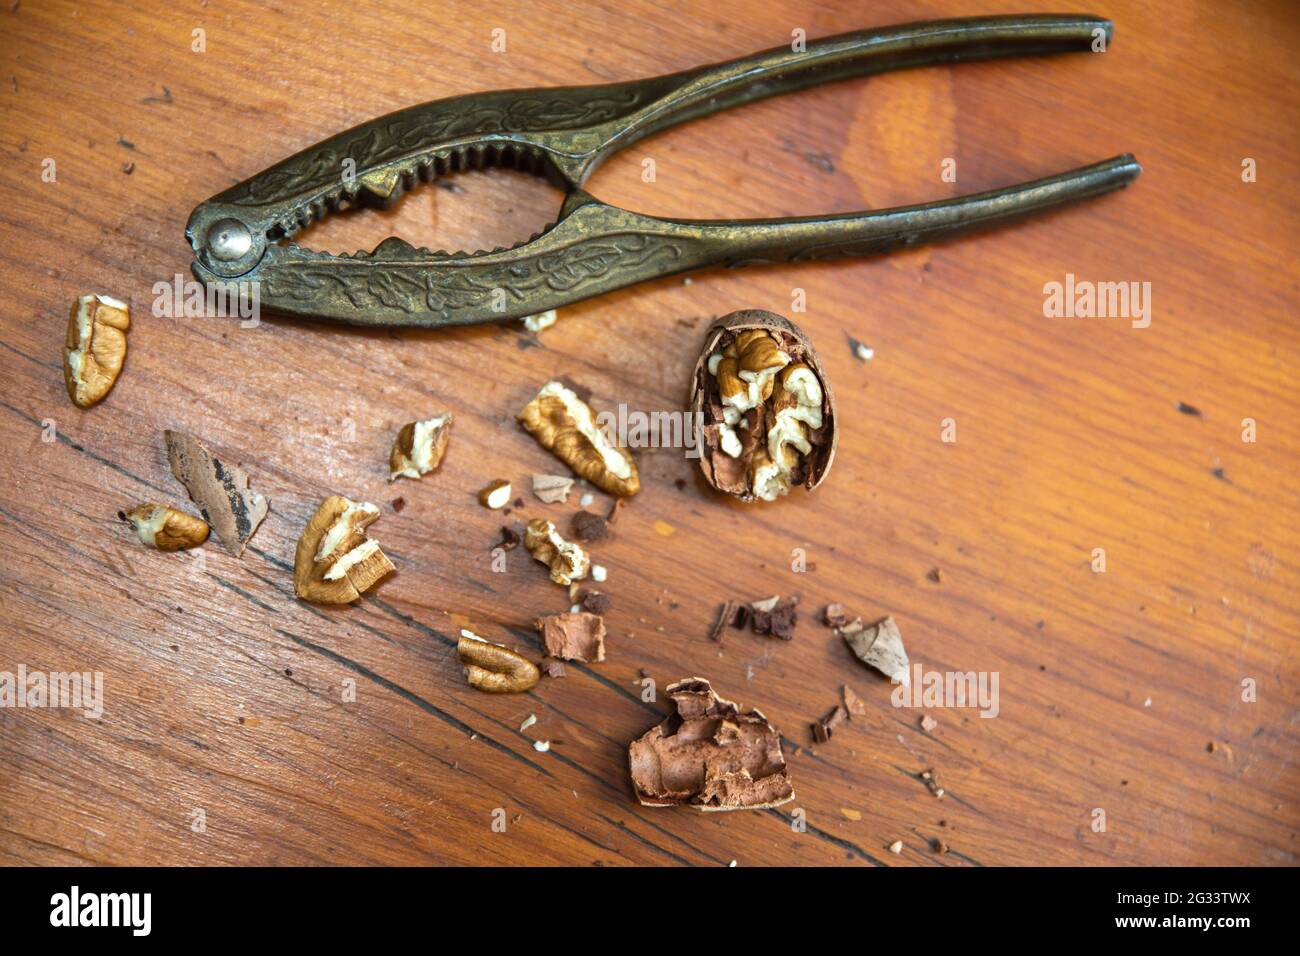 Vintage Nut Cracker with pecan nuts on a wood table Stock Photo